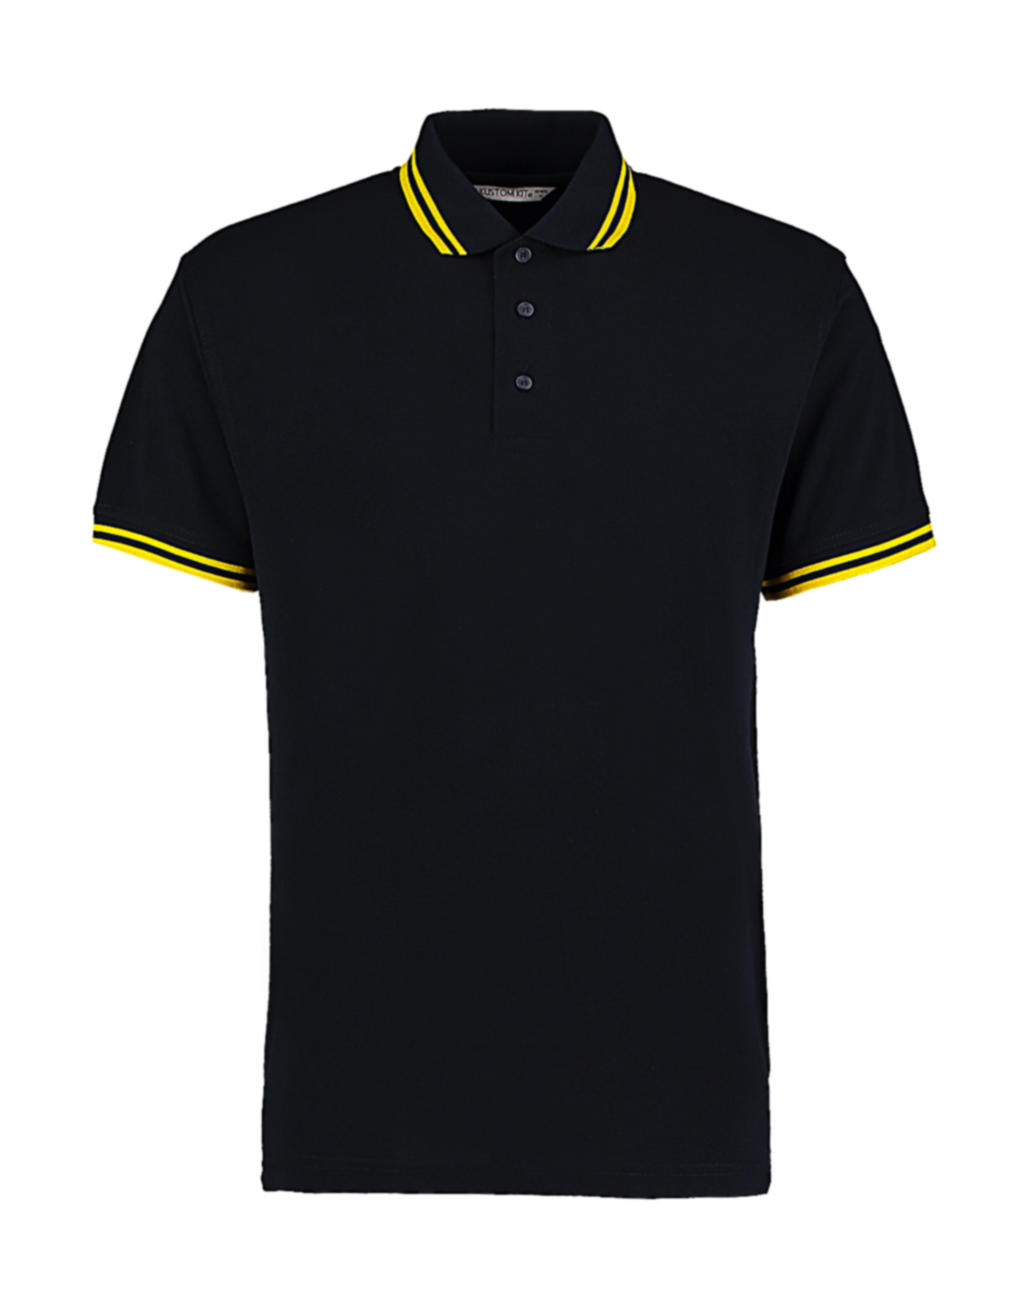  Classic Fit Tipped Collar Polo in Farbe Navy/Sun Yellow